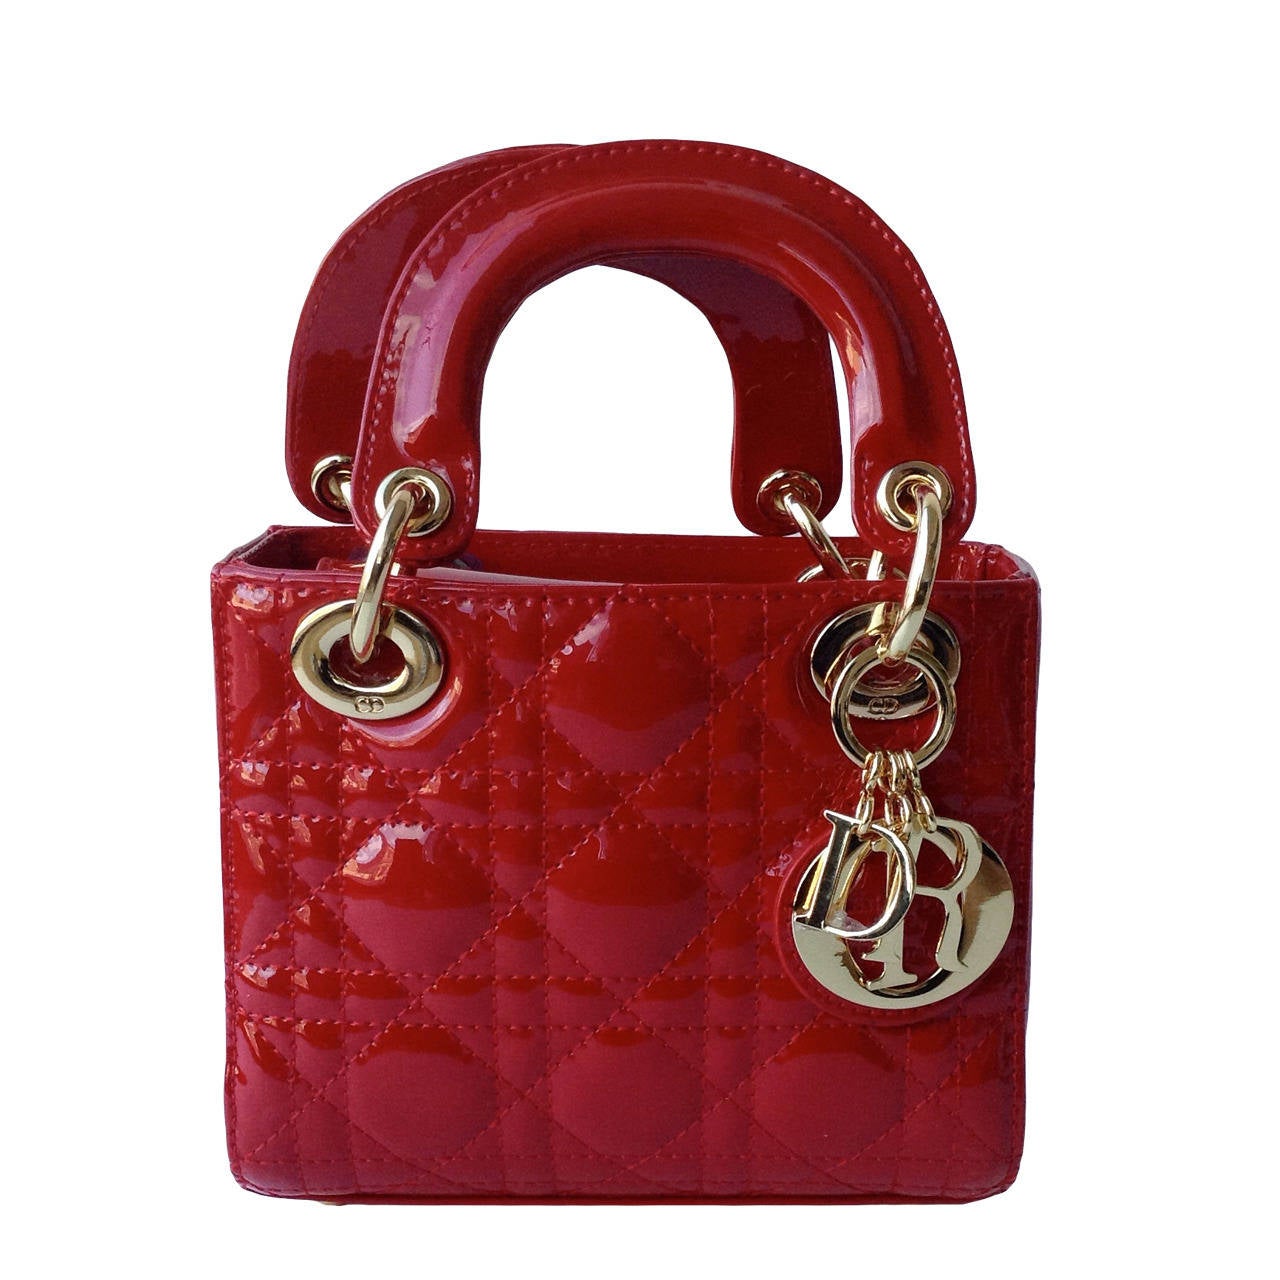 Red Patent Christian Dior Lady Dior Bag For Sale